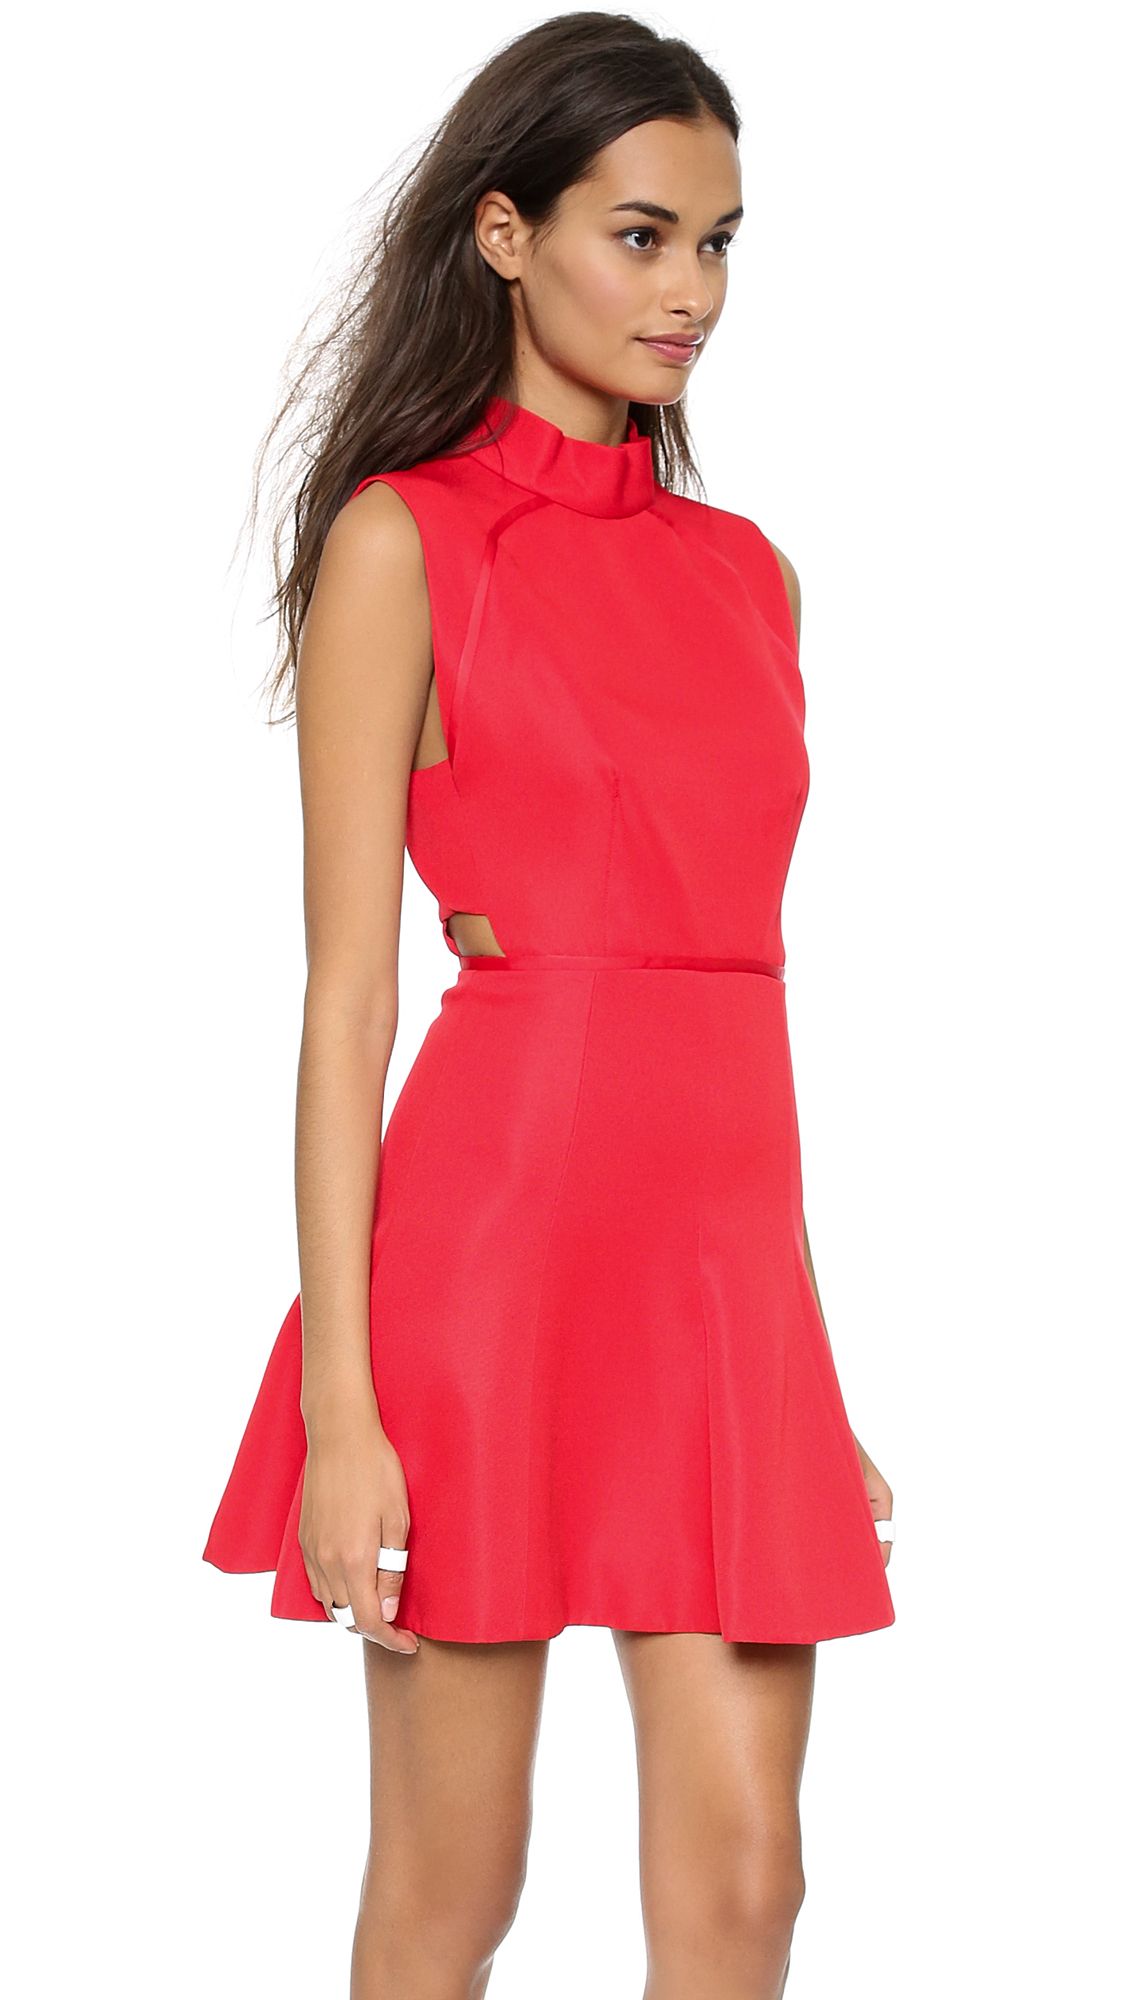 Camilla And Marc Vaporware Sharkskin Dress Scarlet Red In Red Scarlet Red Lyst